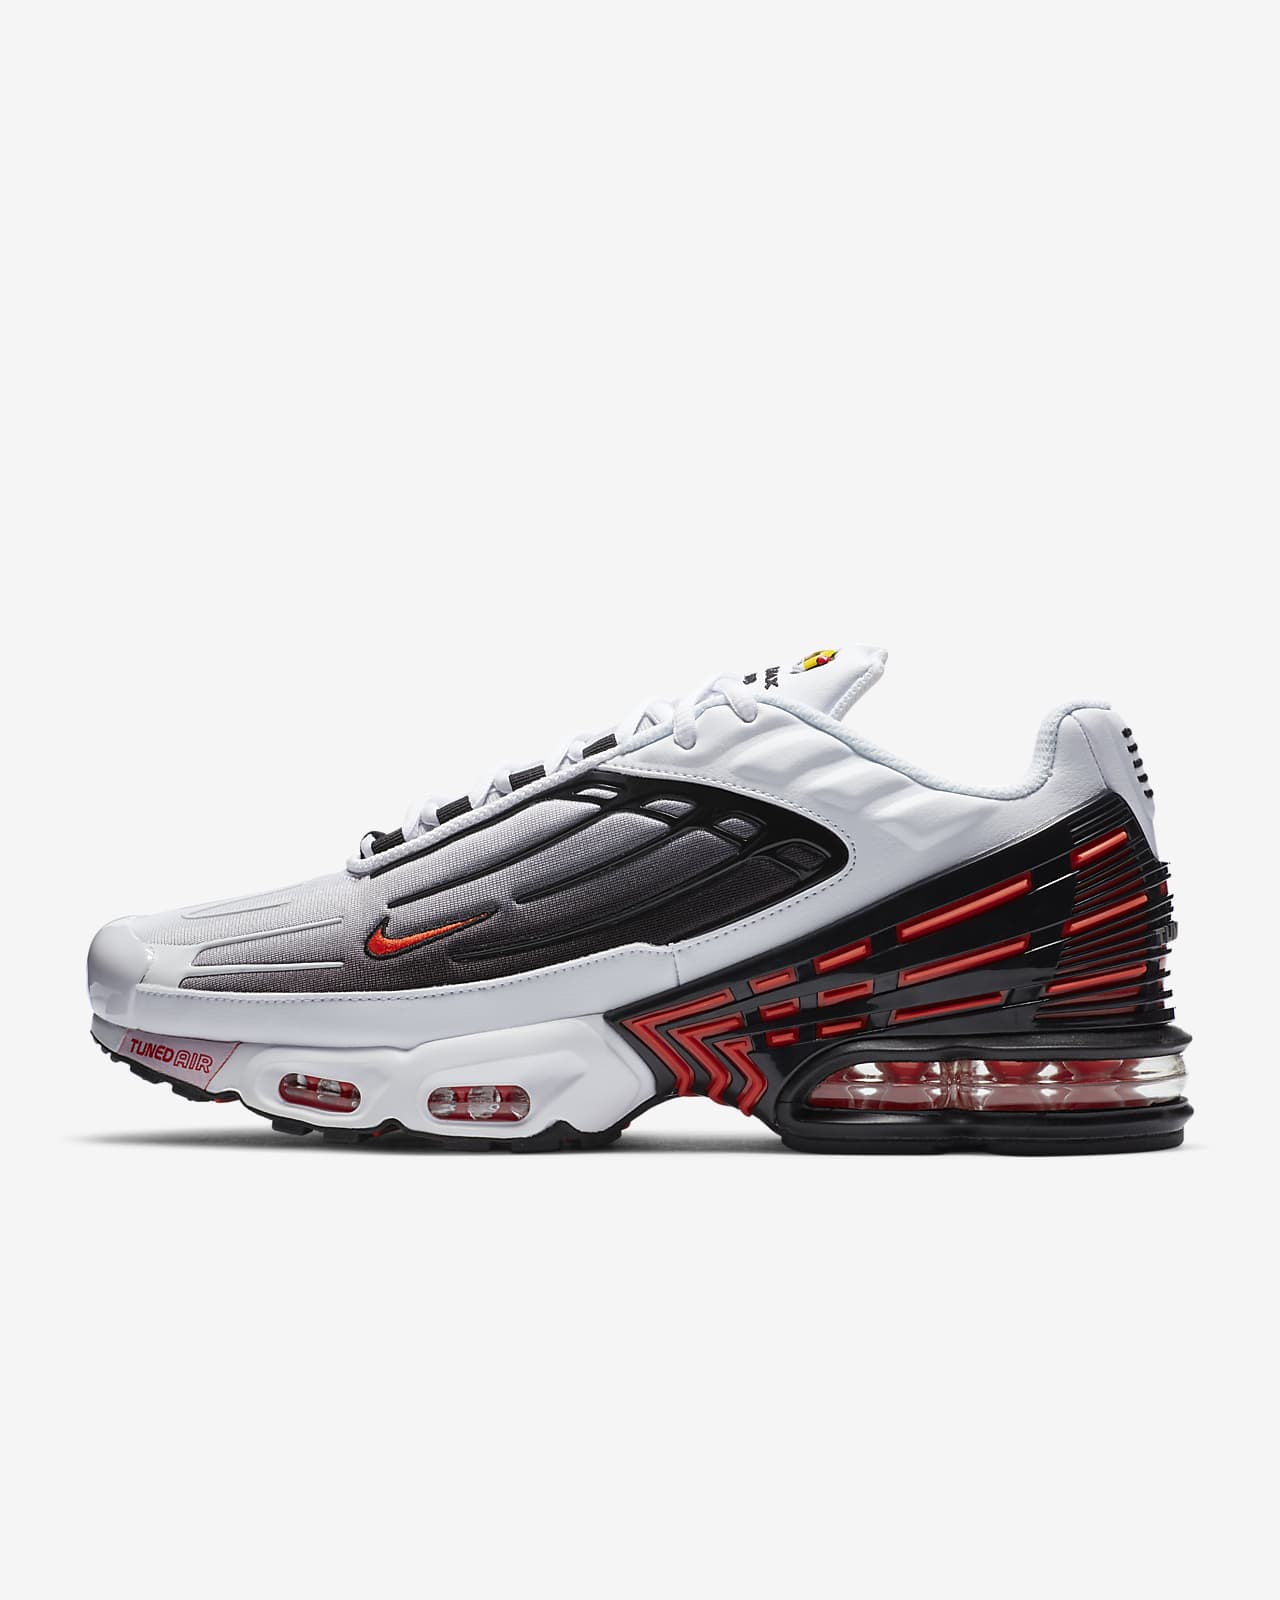 Nike Air Max Tn 3 Online Hotsell, UP TO 50% OFF